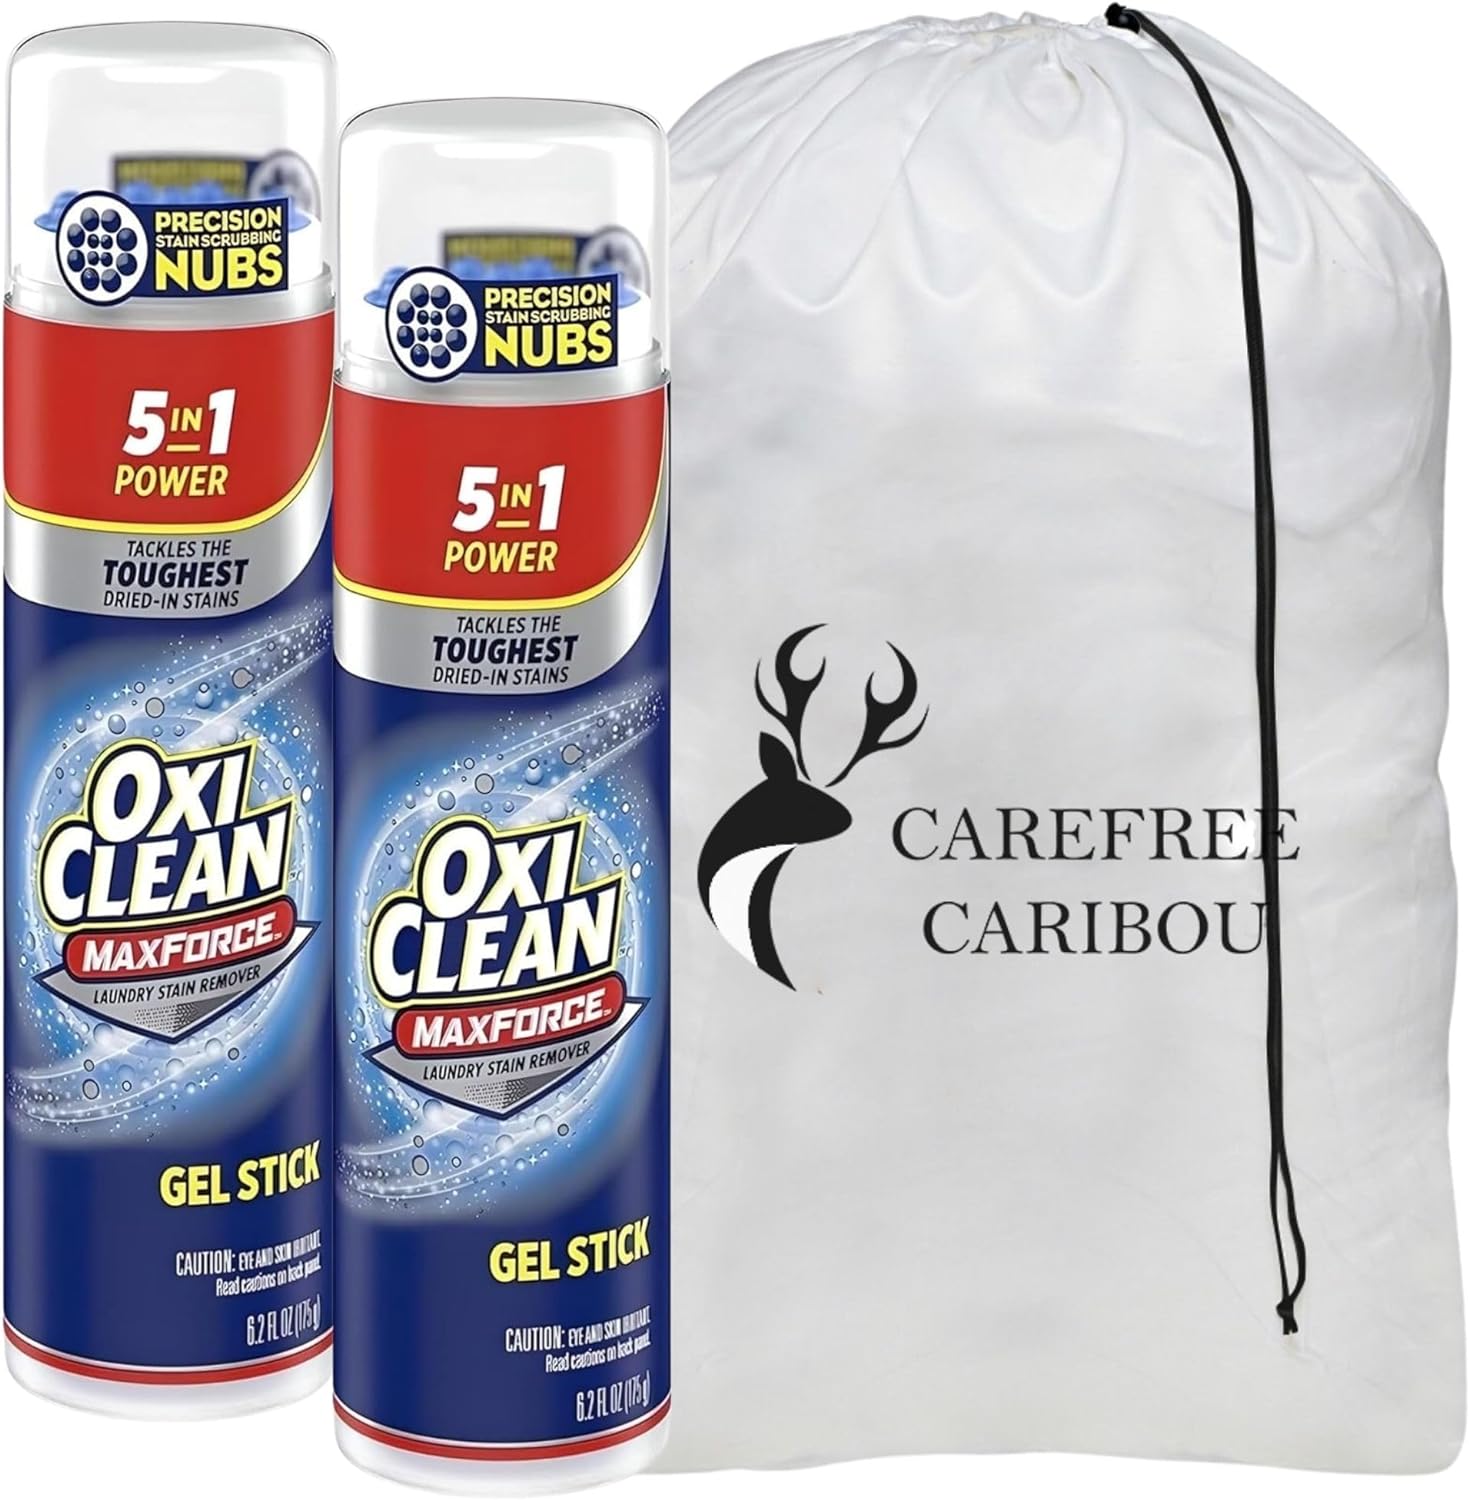 Stain Sticks For Clothes & Heavy Duty Laundry Bag Bundle: Featuring Two-"Oxi" Clean 6.2 Oz Gel Stick & One Extra-Large 24x36" Carefree Caribou Laundry Bags. Ideal for Travel, Gym & Home Use